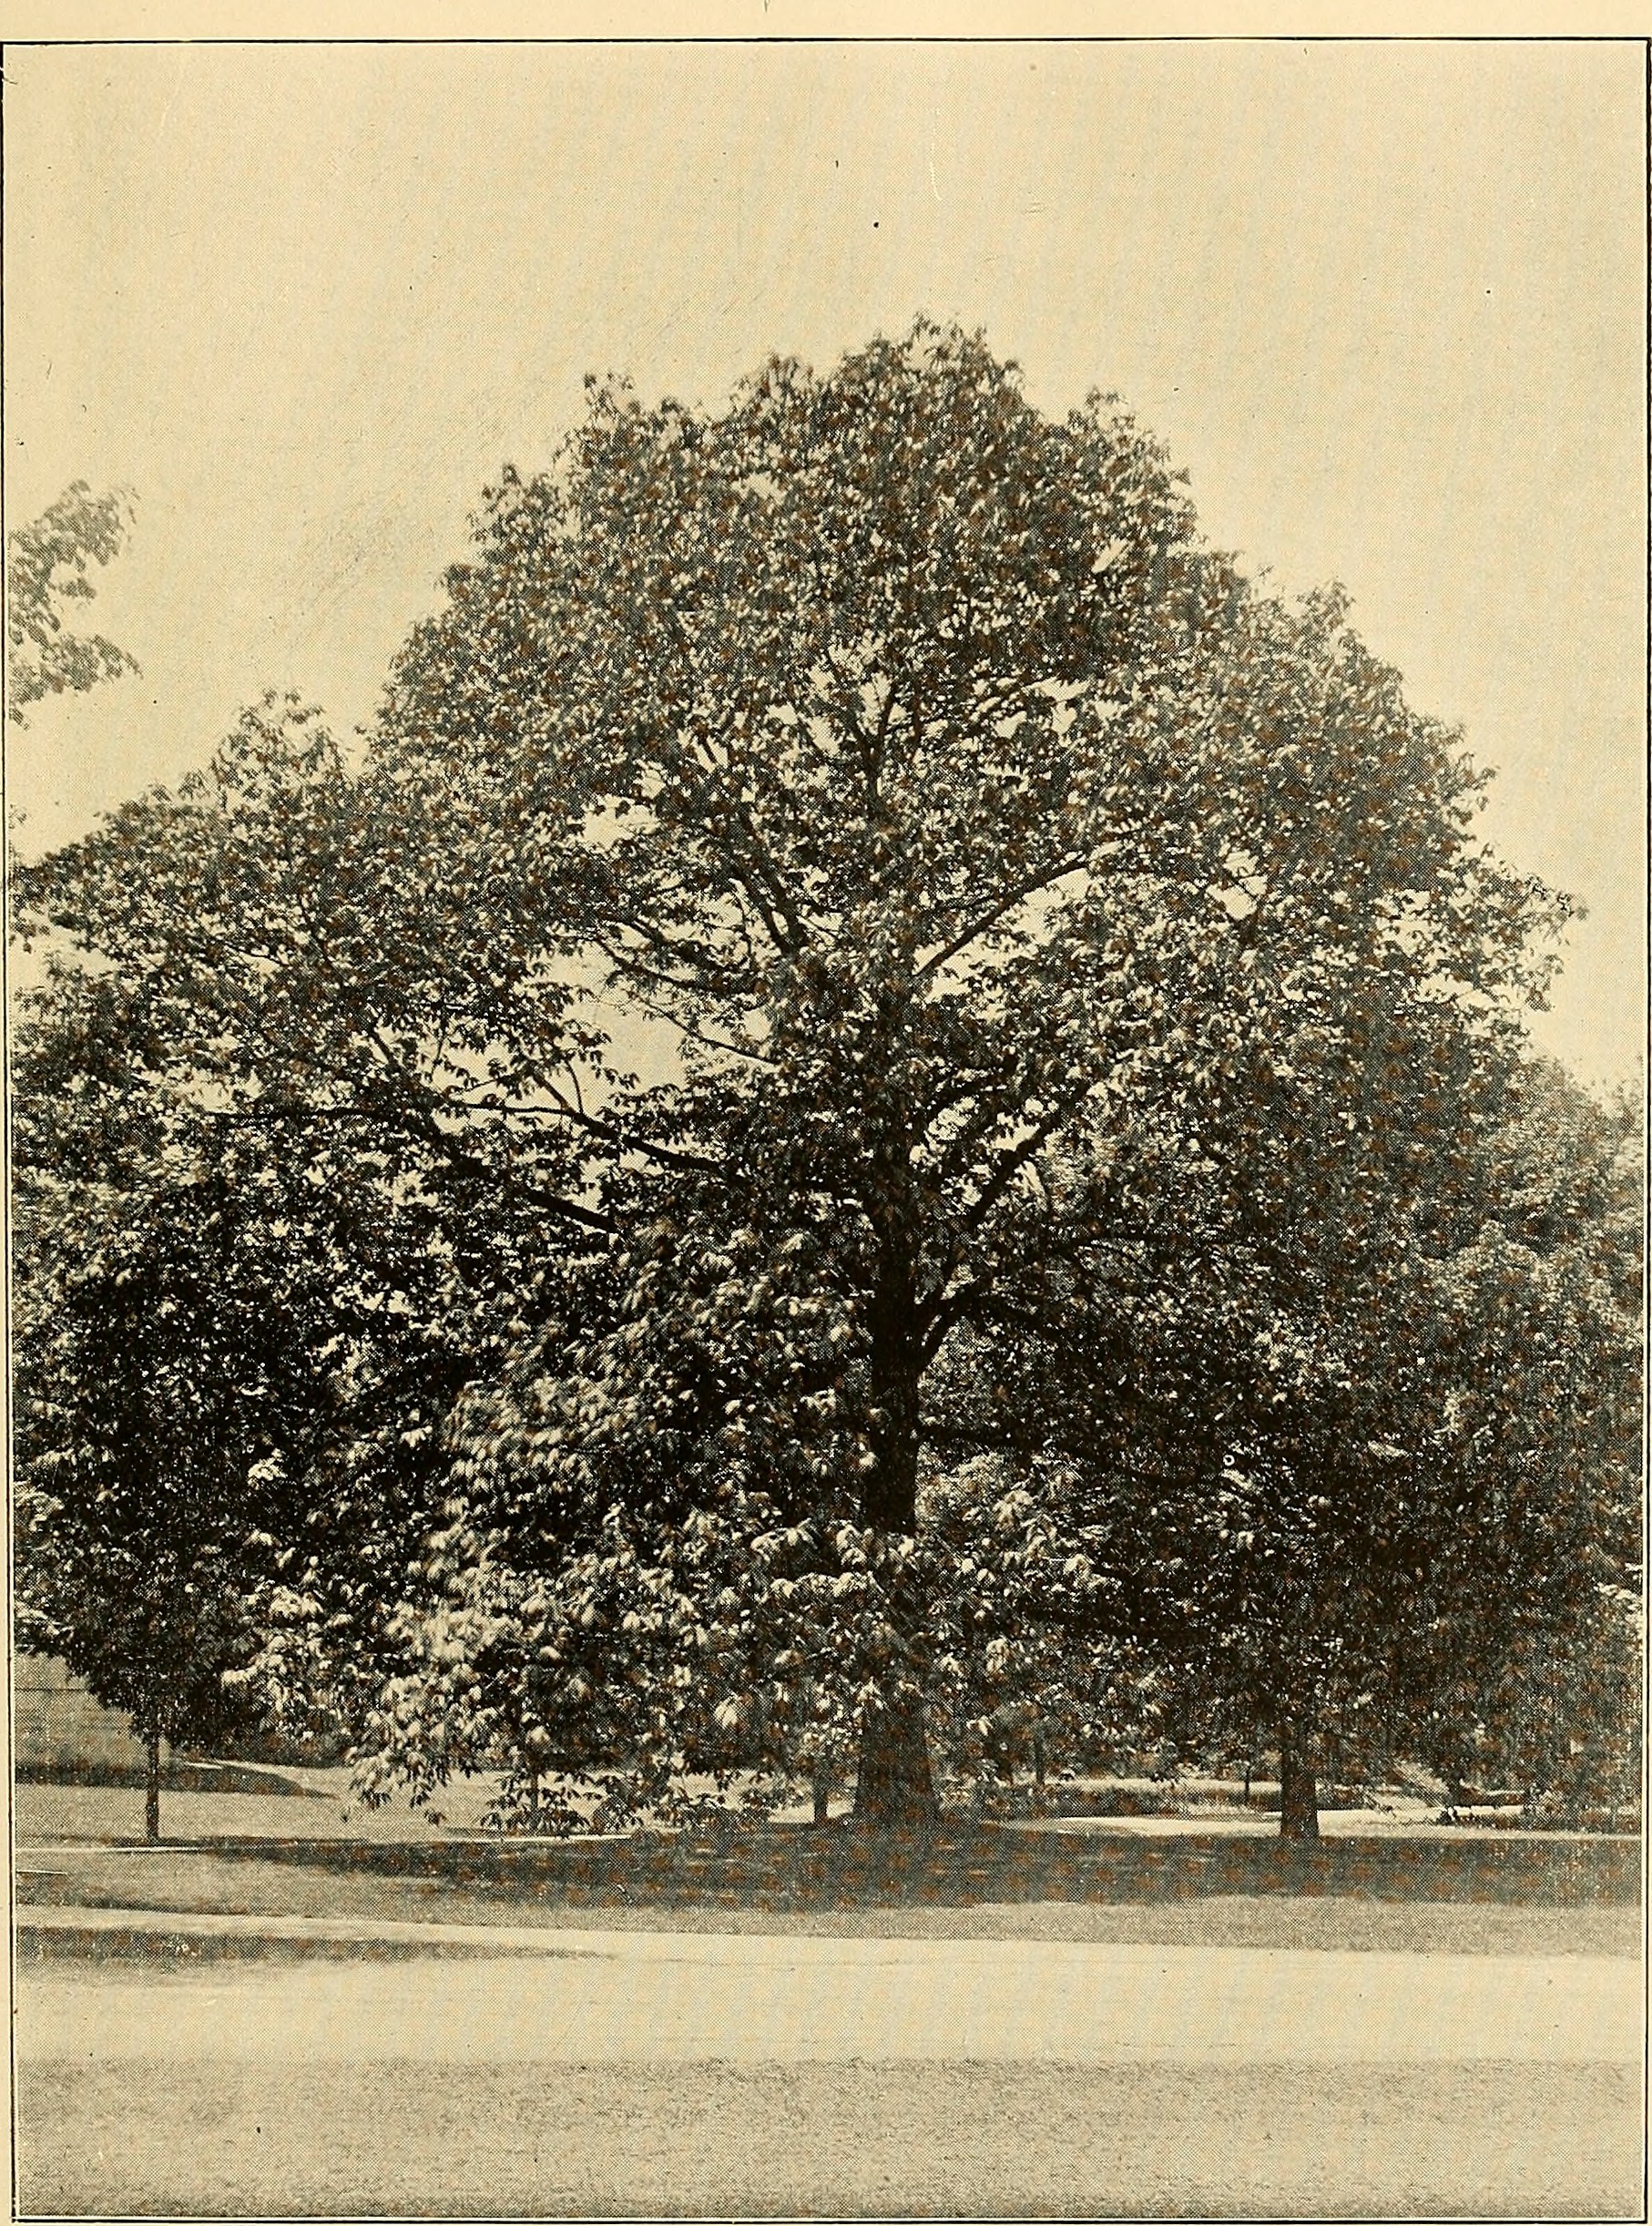 An American chestnut on the grounds of Vassar College, 1909